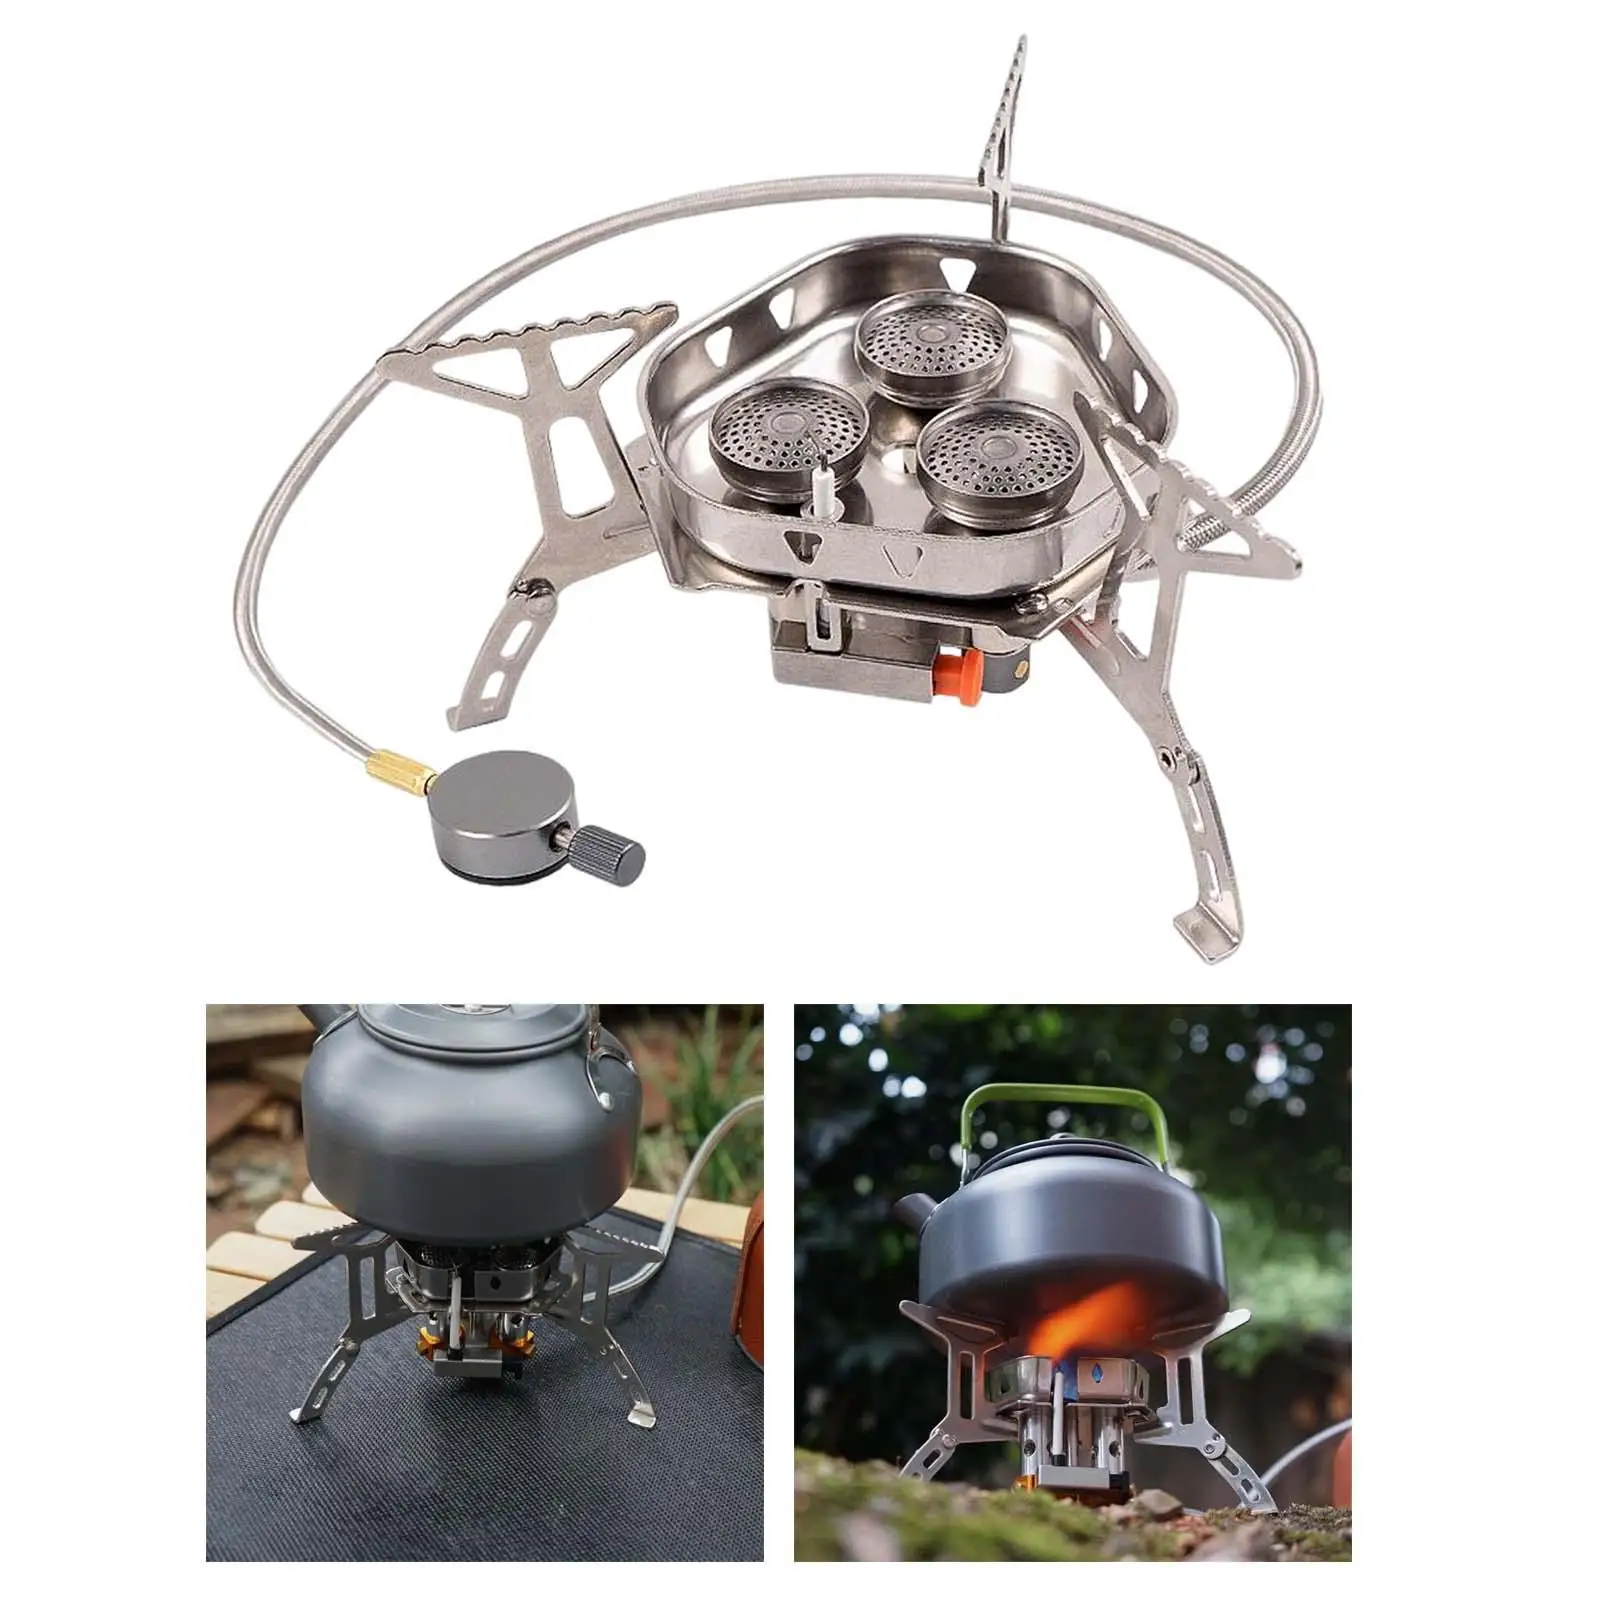 Durable Camping Gas Stove 3 Heads Foldable Cooking Tool Gear Propane Stove Backpack Stove for Picnic Outdoor Cooking Travel